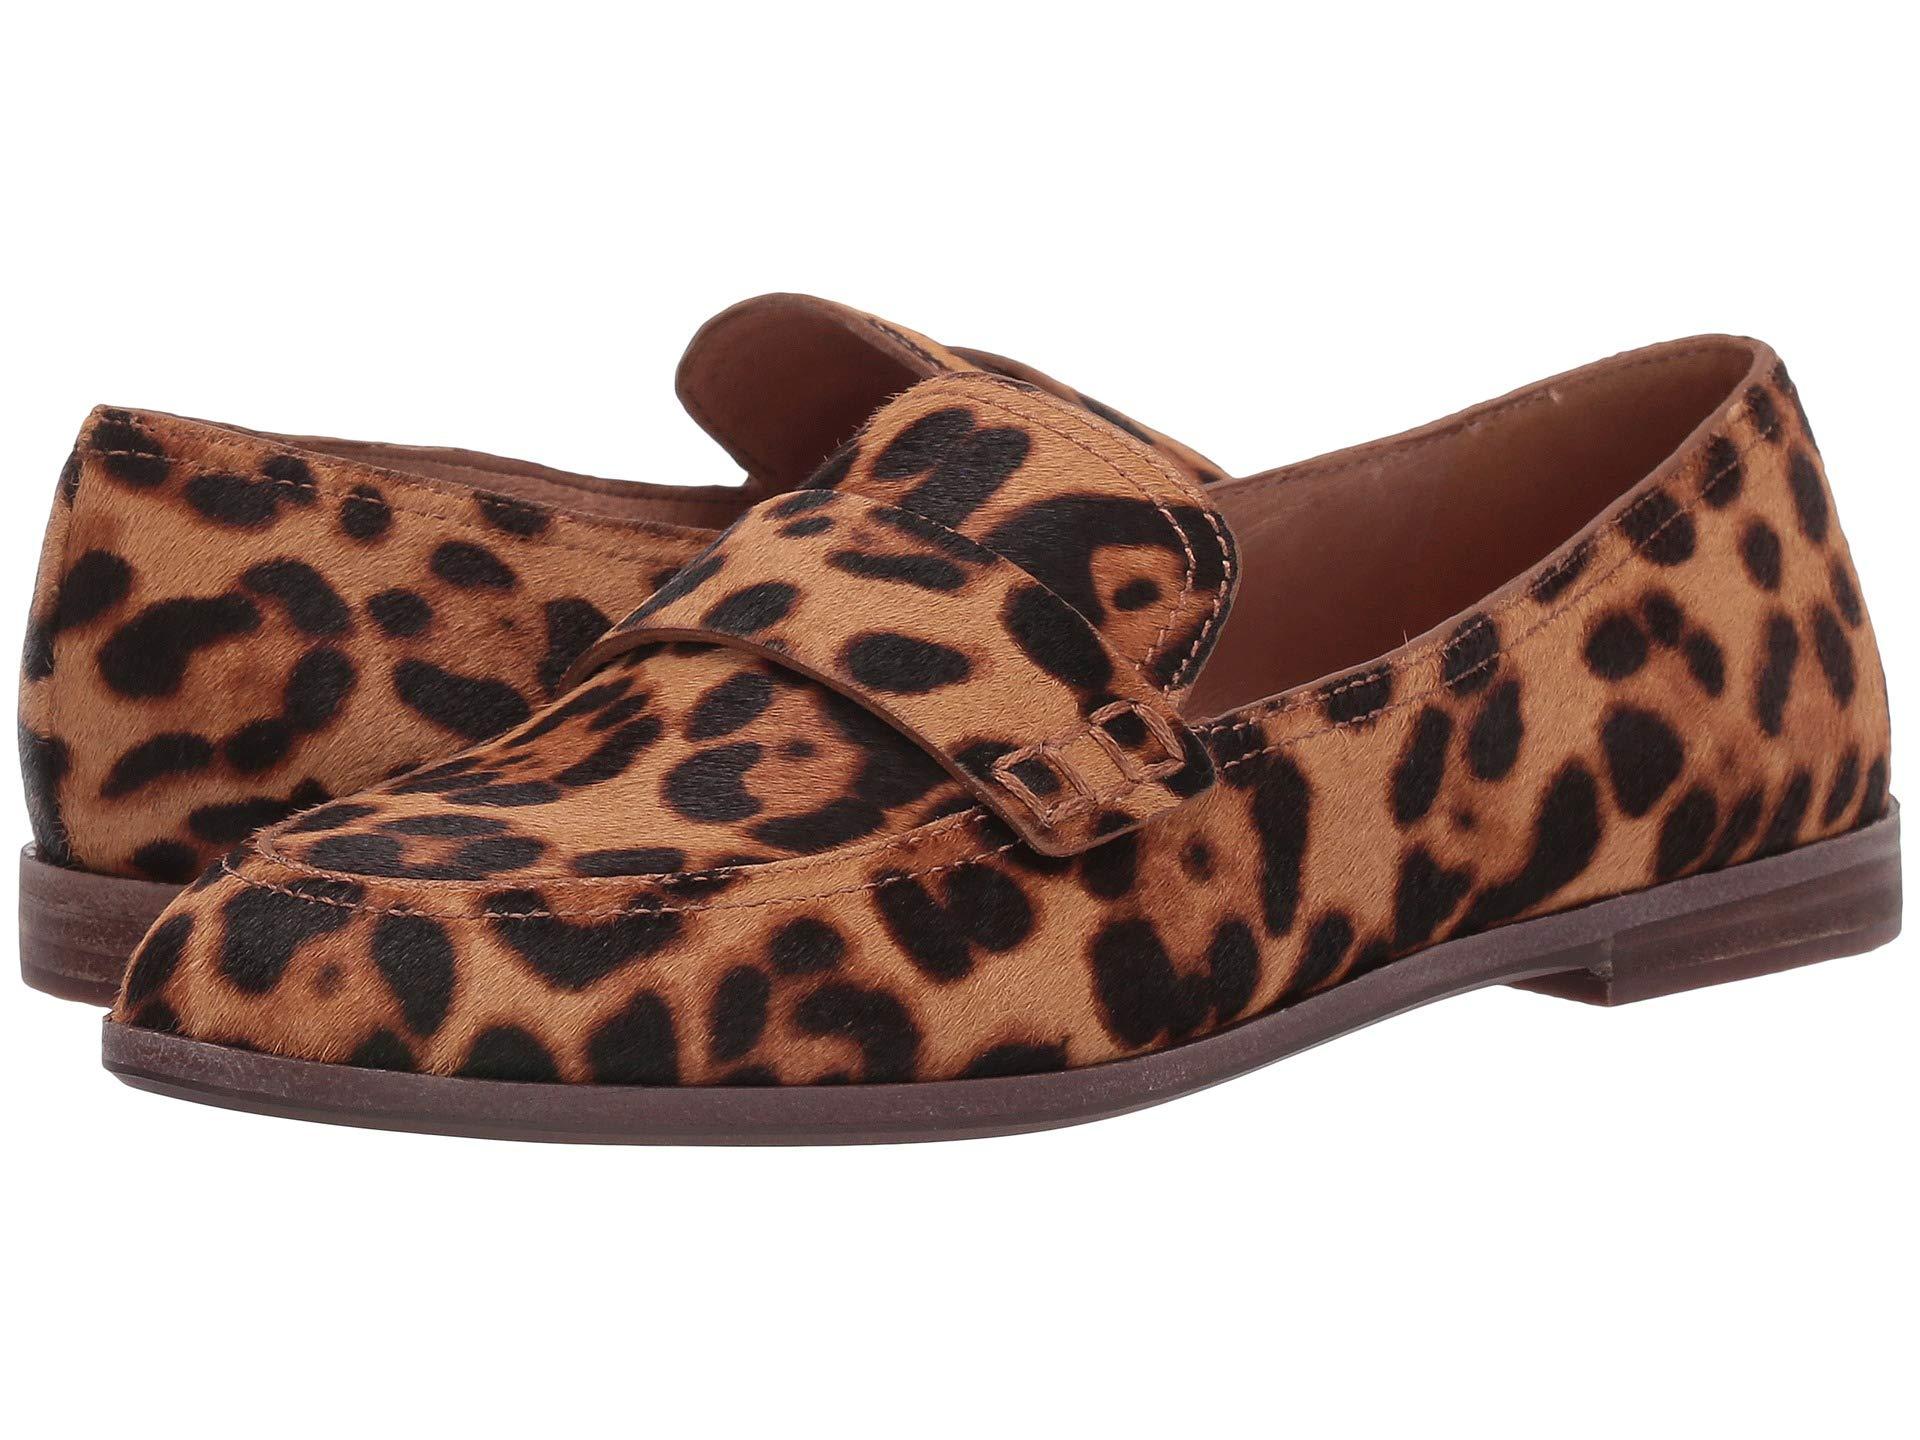 Madewell Leather Alex Loafer in Animal Print (Brown) - Save 10% - Lyst